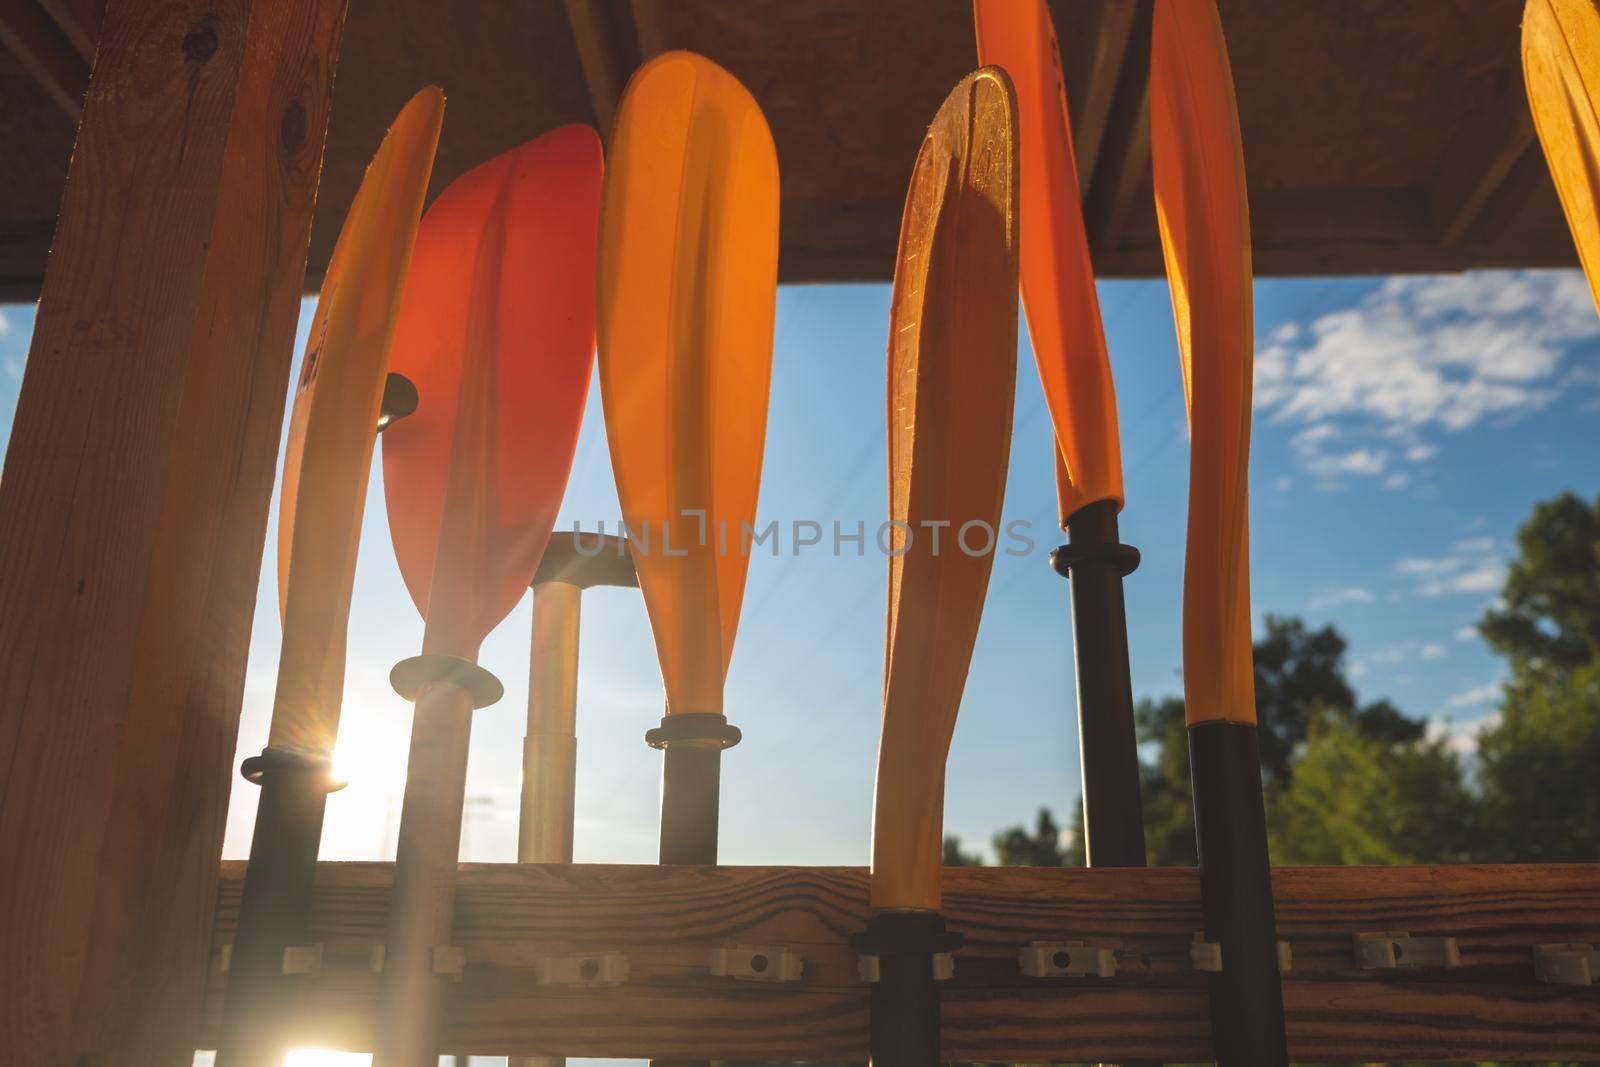 blades of paddles various colors , paddling concept by igor010